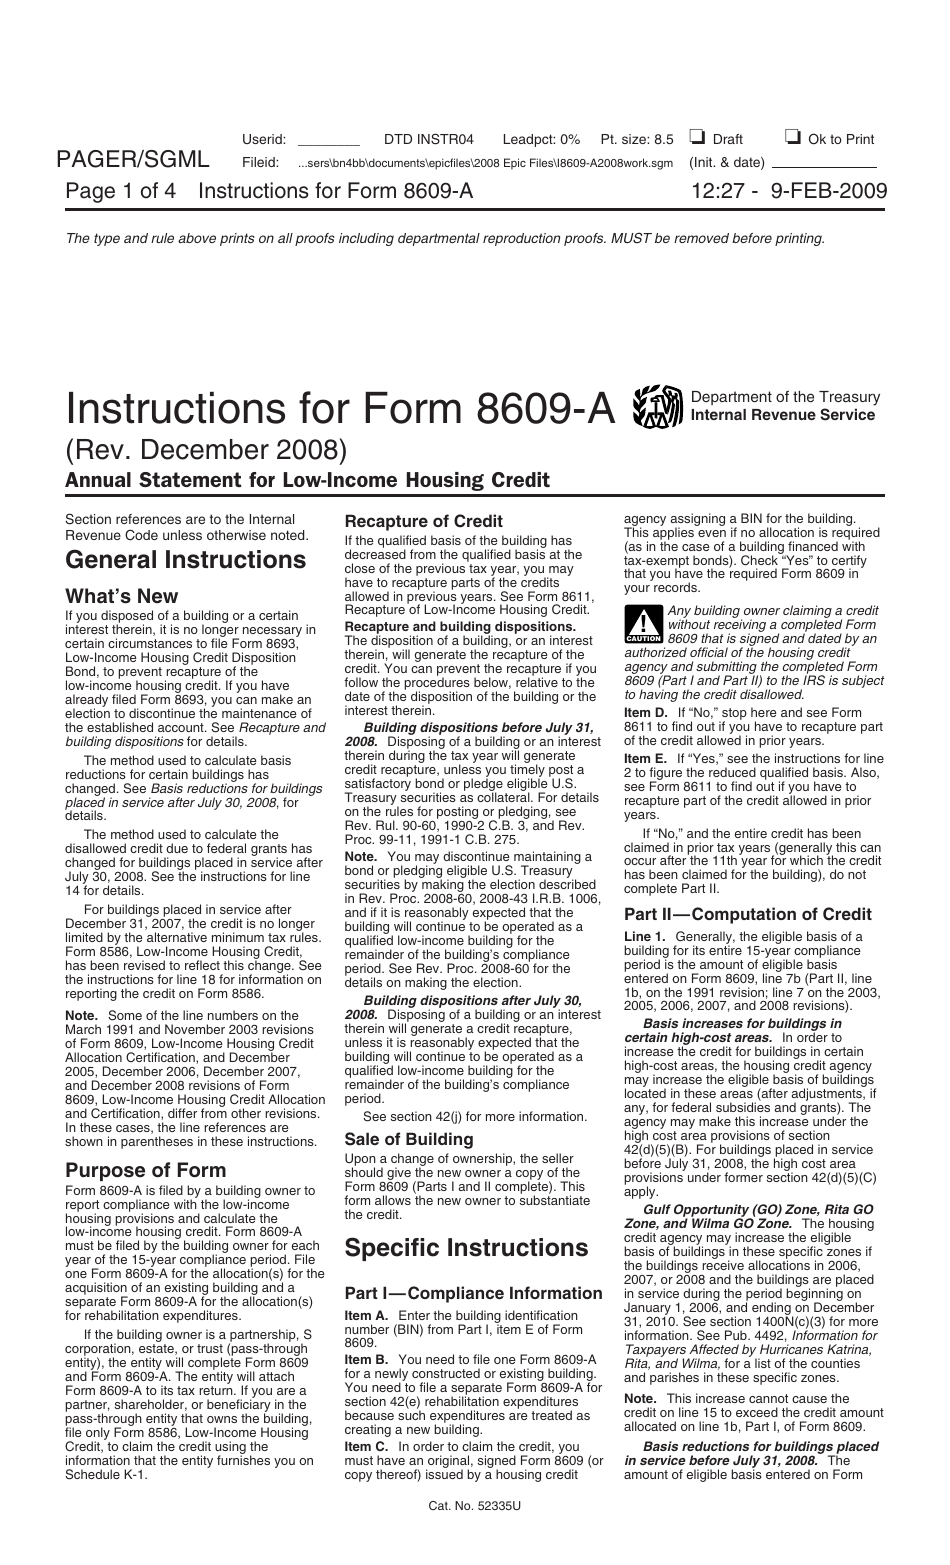 Instructions for IRS Form 8609-A Annual Statement for Low-Income Housing Credit, Page 1